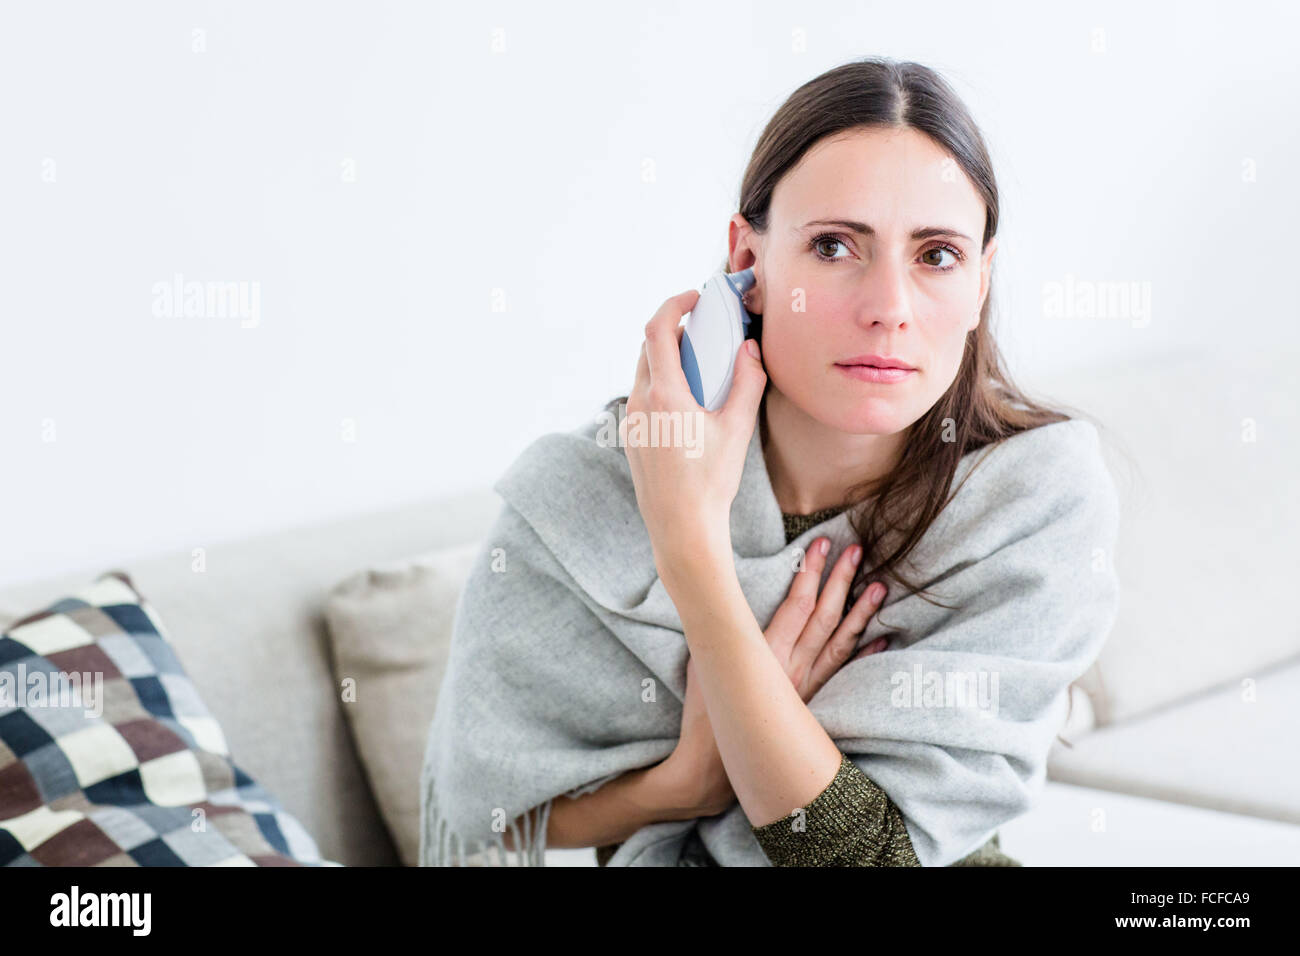 Woman taking her temperature with a digital tympanic thermometer. Stock Photo